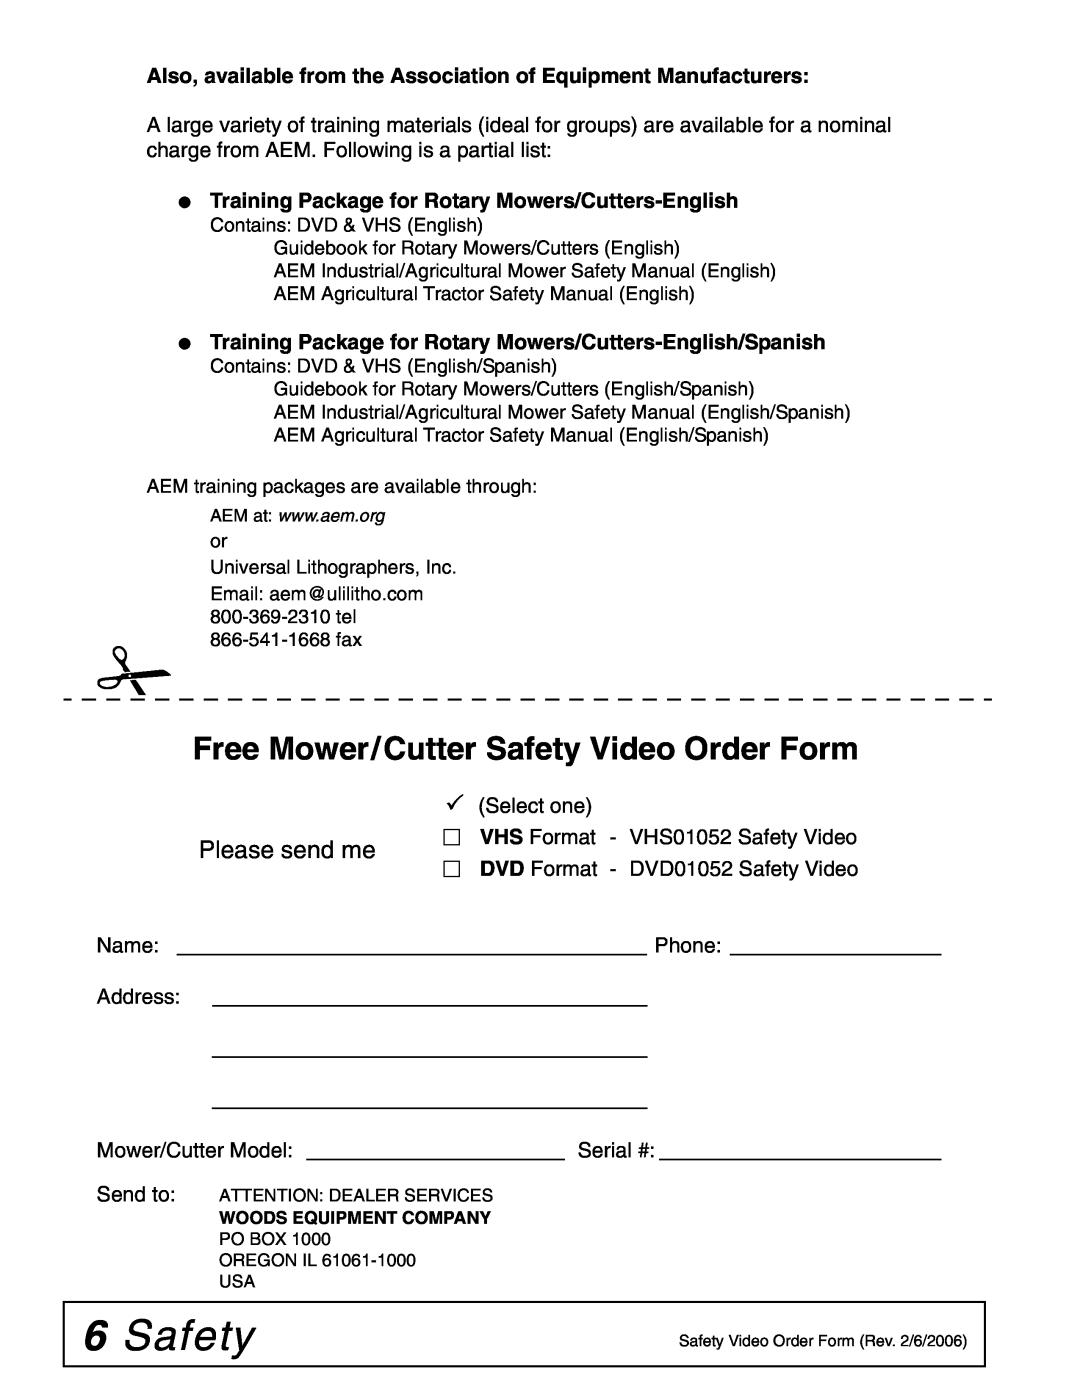 Woods Equipment DSO1260Q Free Mower/Cutter Safety Video Order Form, Please send me, Select one, Name Phone Address 